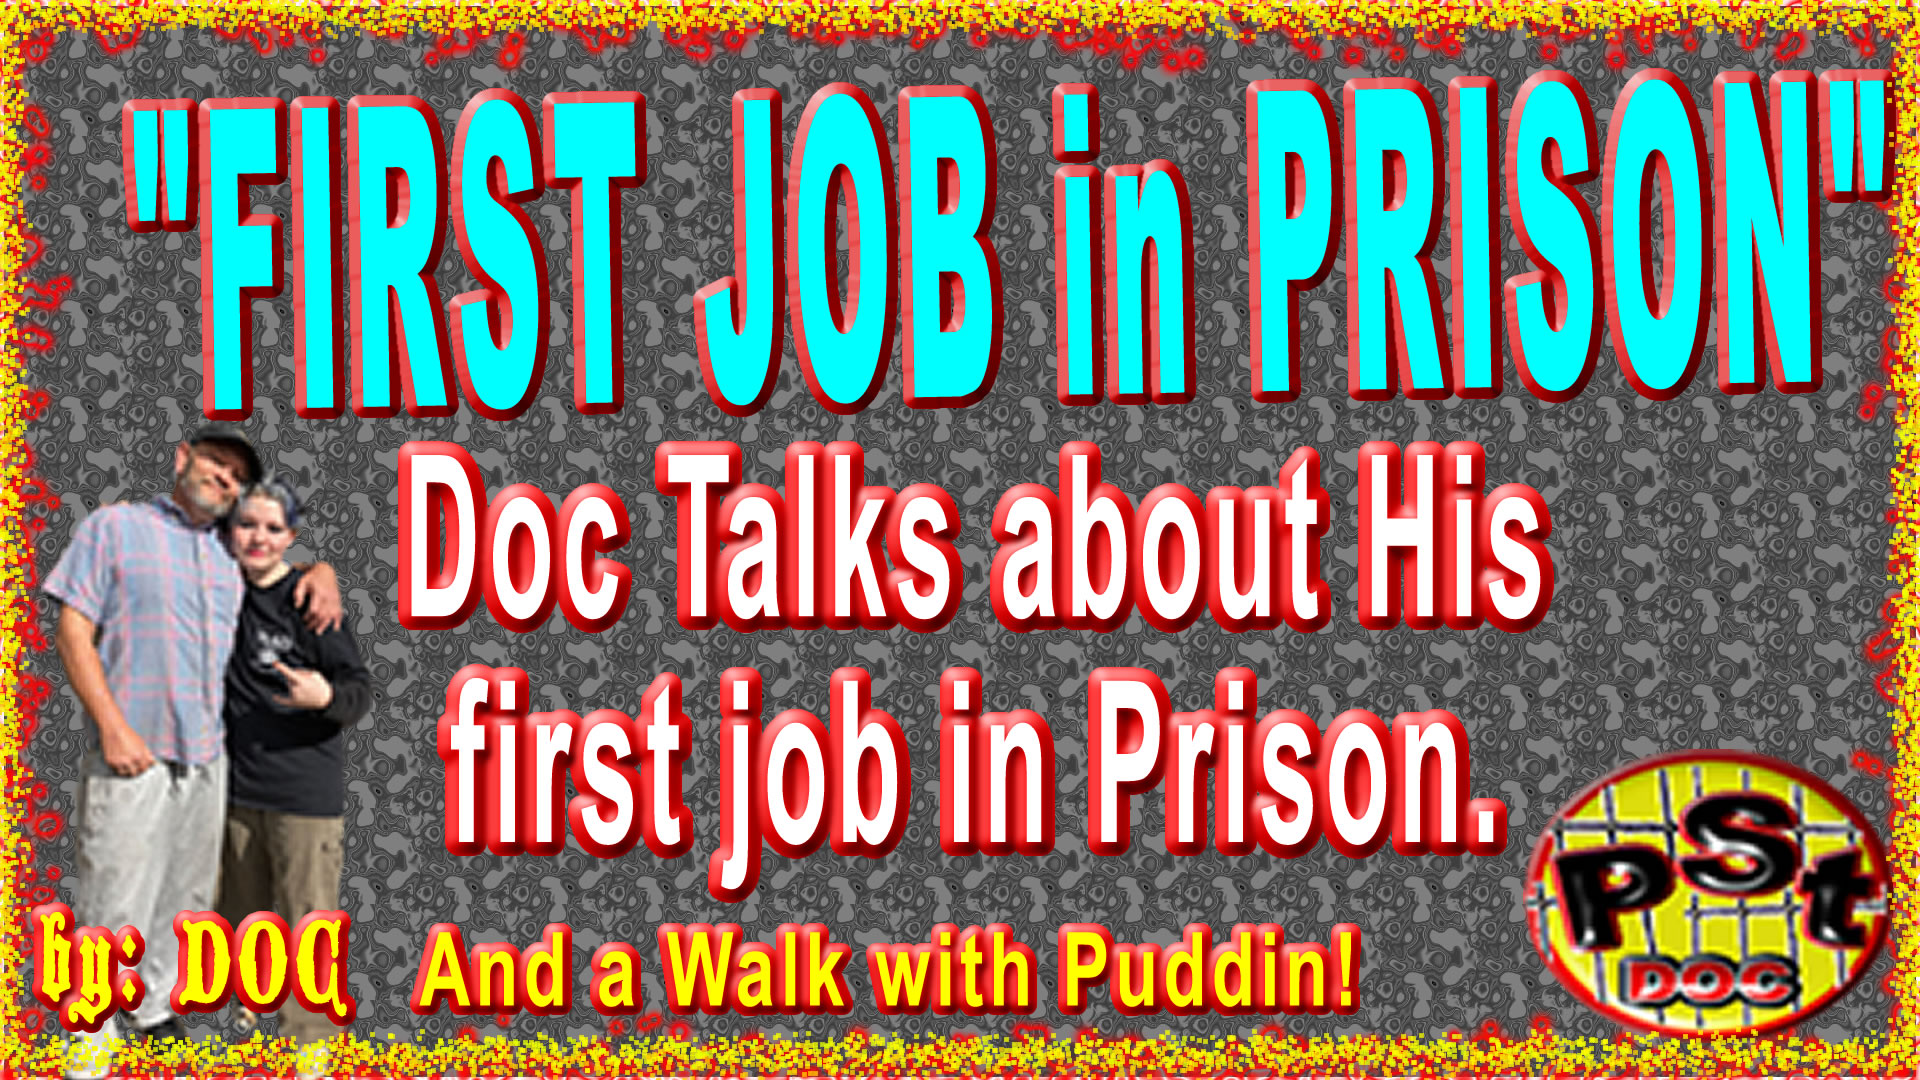 First Job in Prison Docs Video walking with Puddin talking about his First Job in Prison